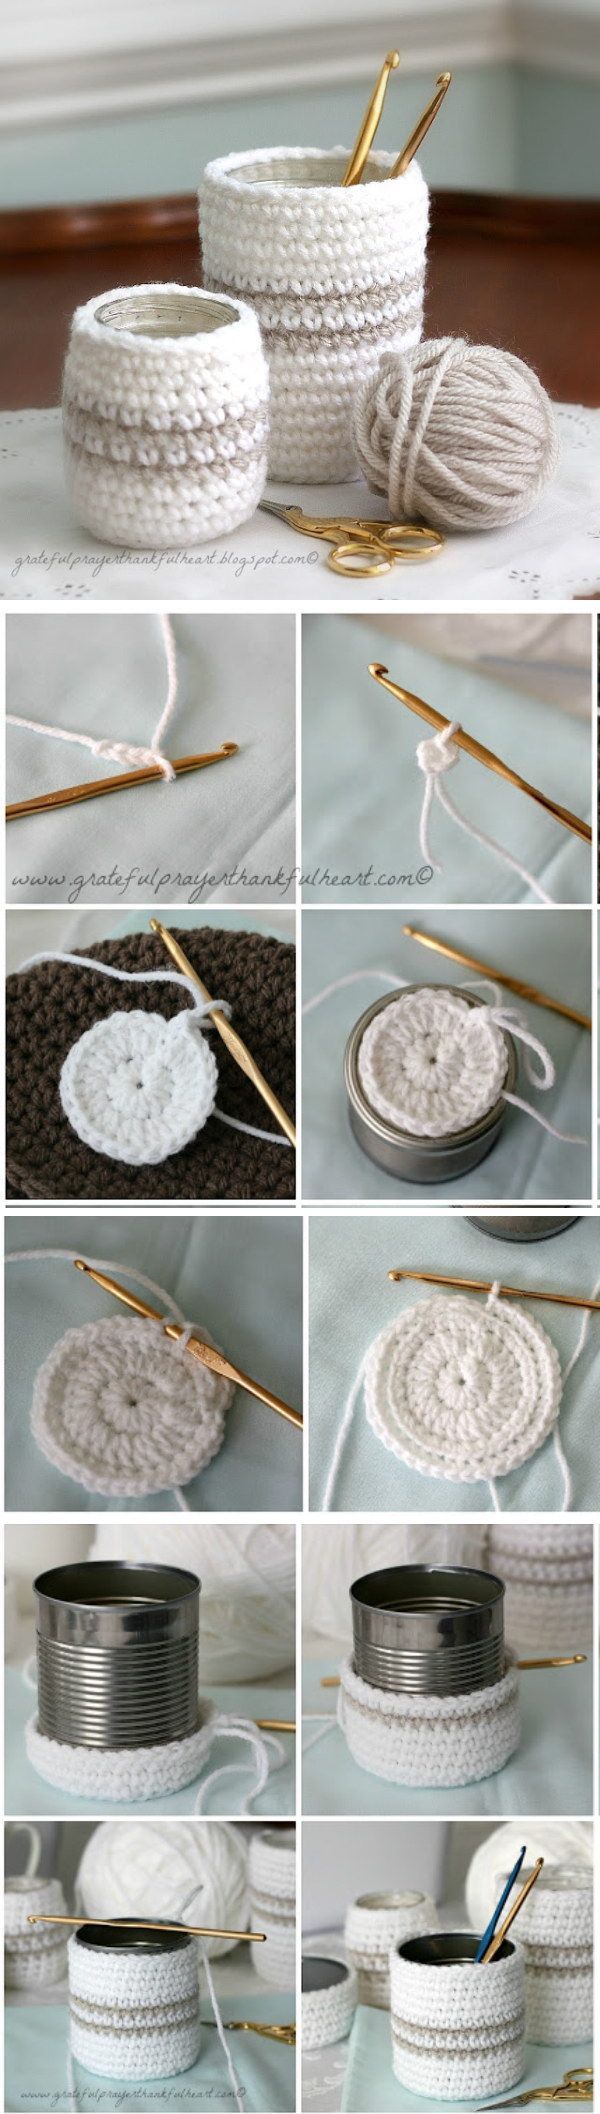 Easy Crochet Projects for You to Start with